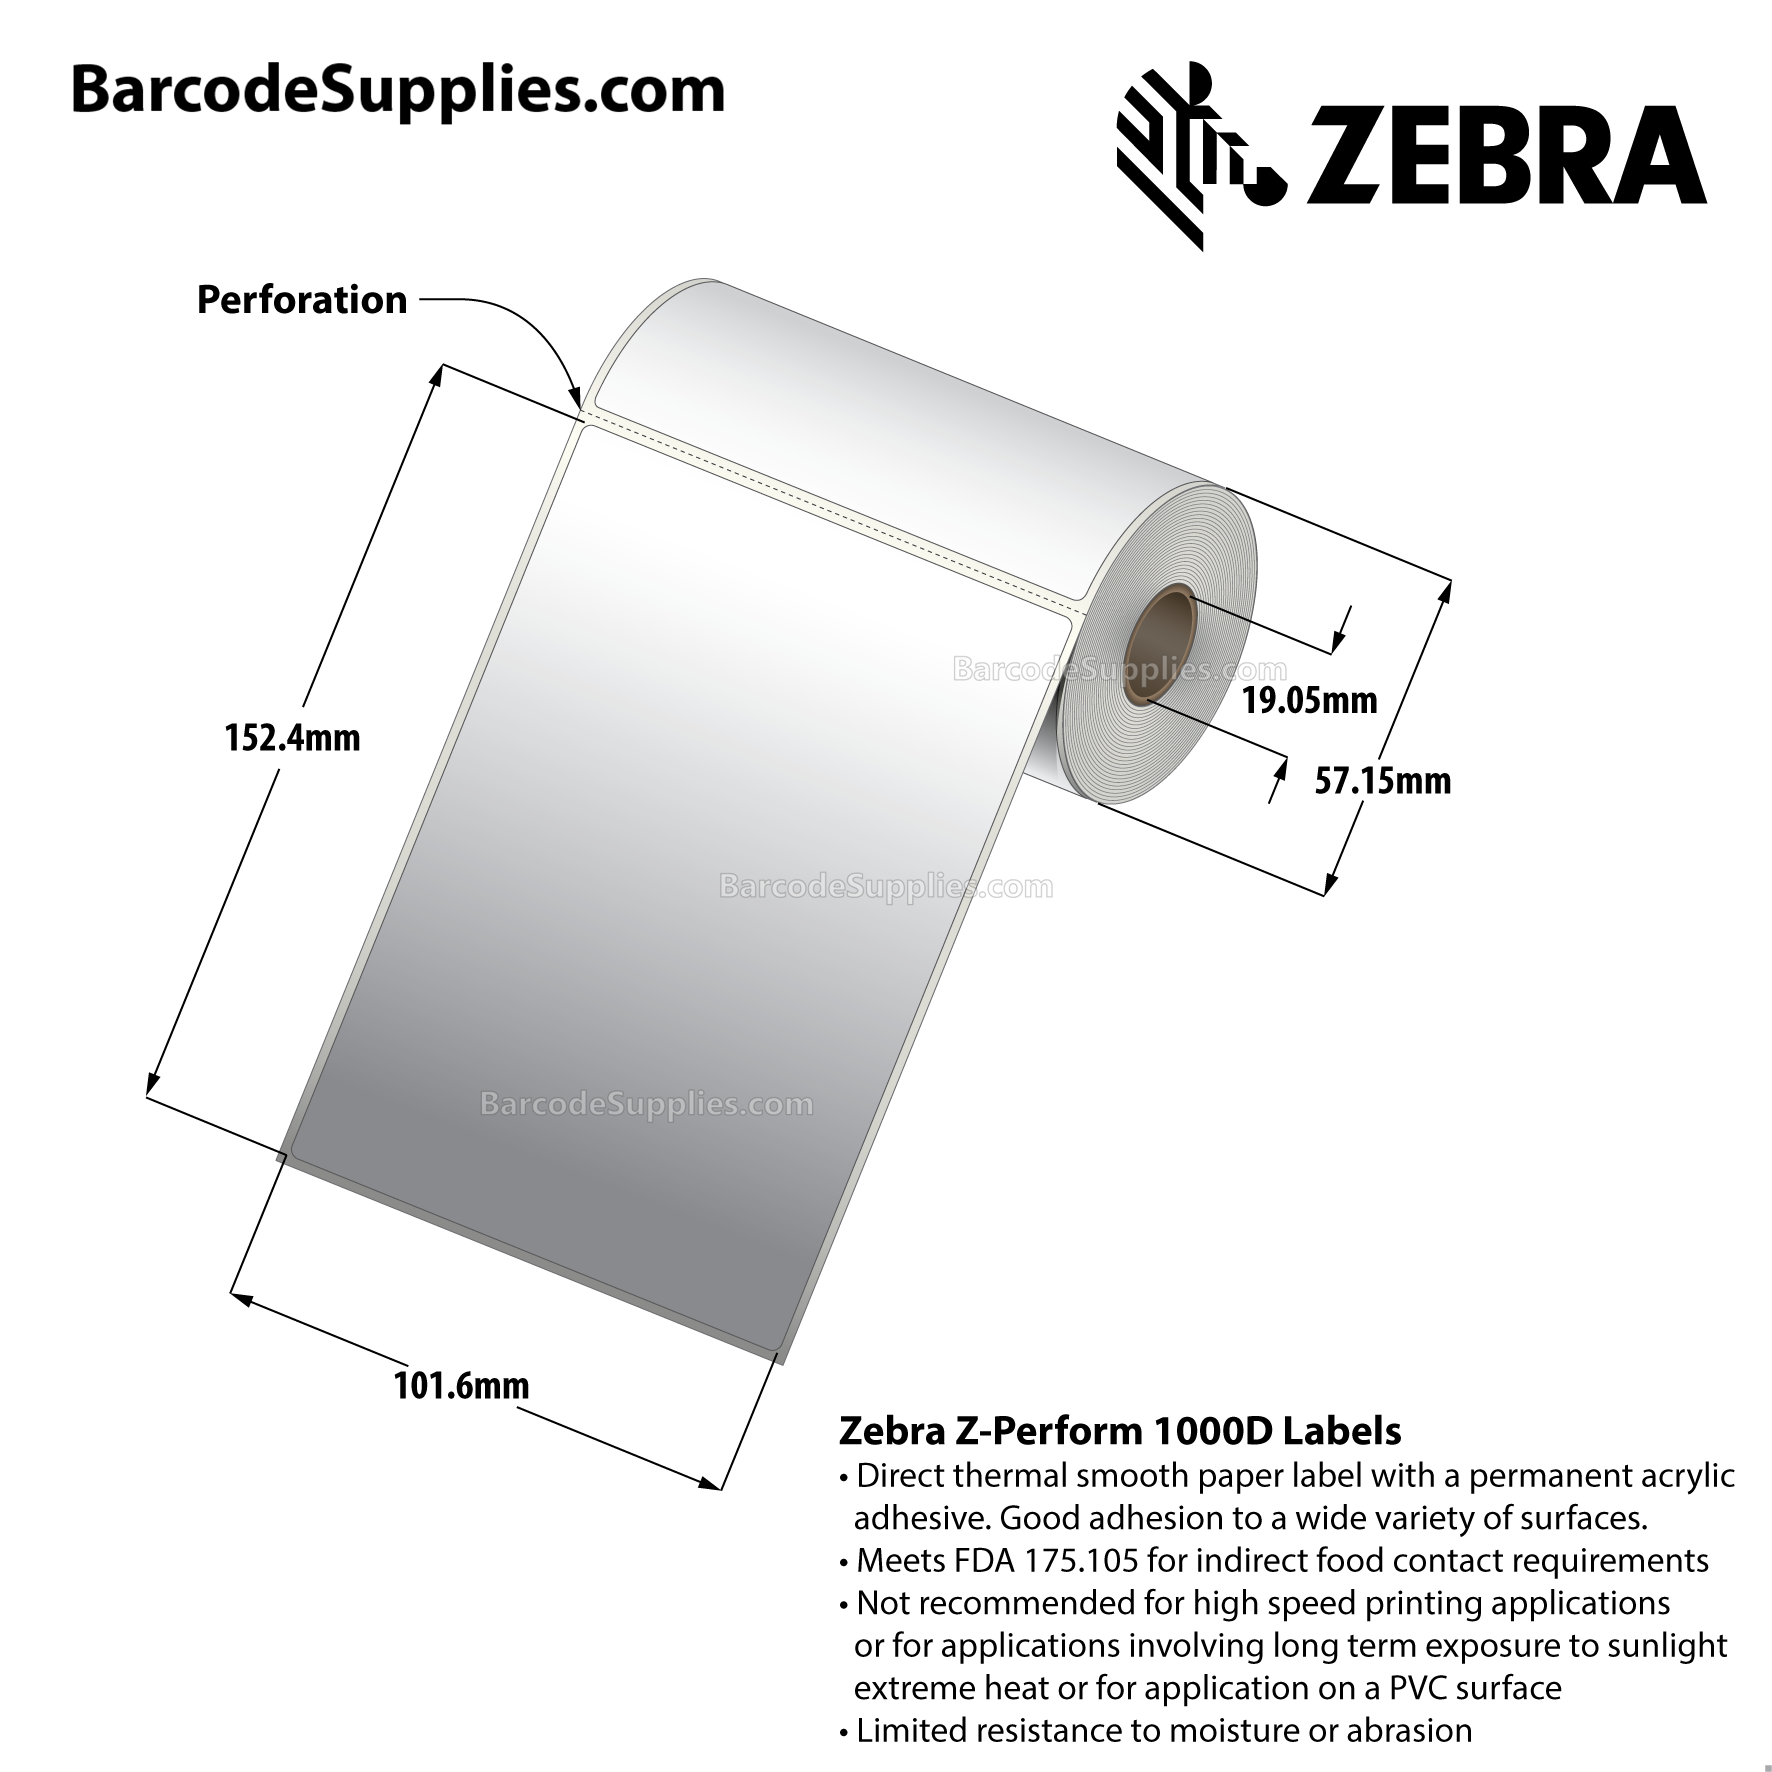 4 x 6 Direct Thermal White Z-Perform 1000D Labels With Permanent Adhesive - Perforated - 75 Labels Per Roll - Carton Of 36 Rolls - 2700 Labels Total - MPN: 10023377